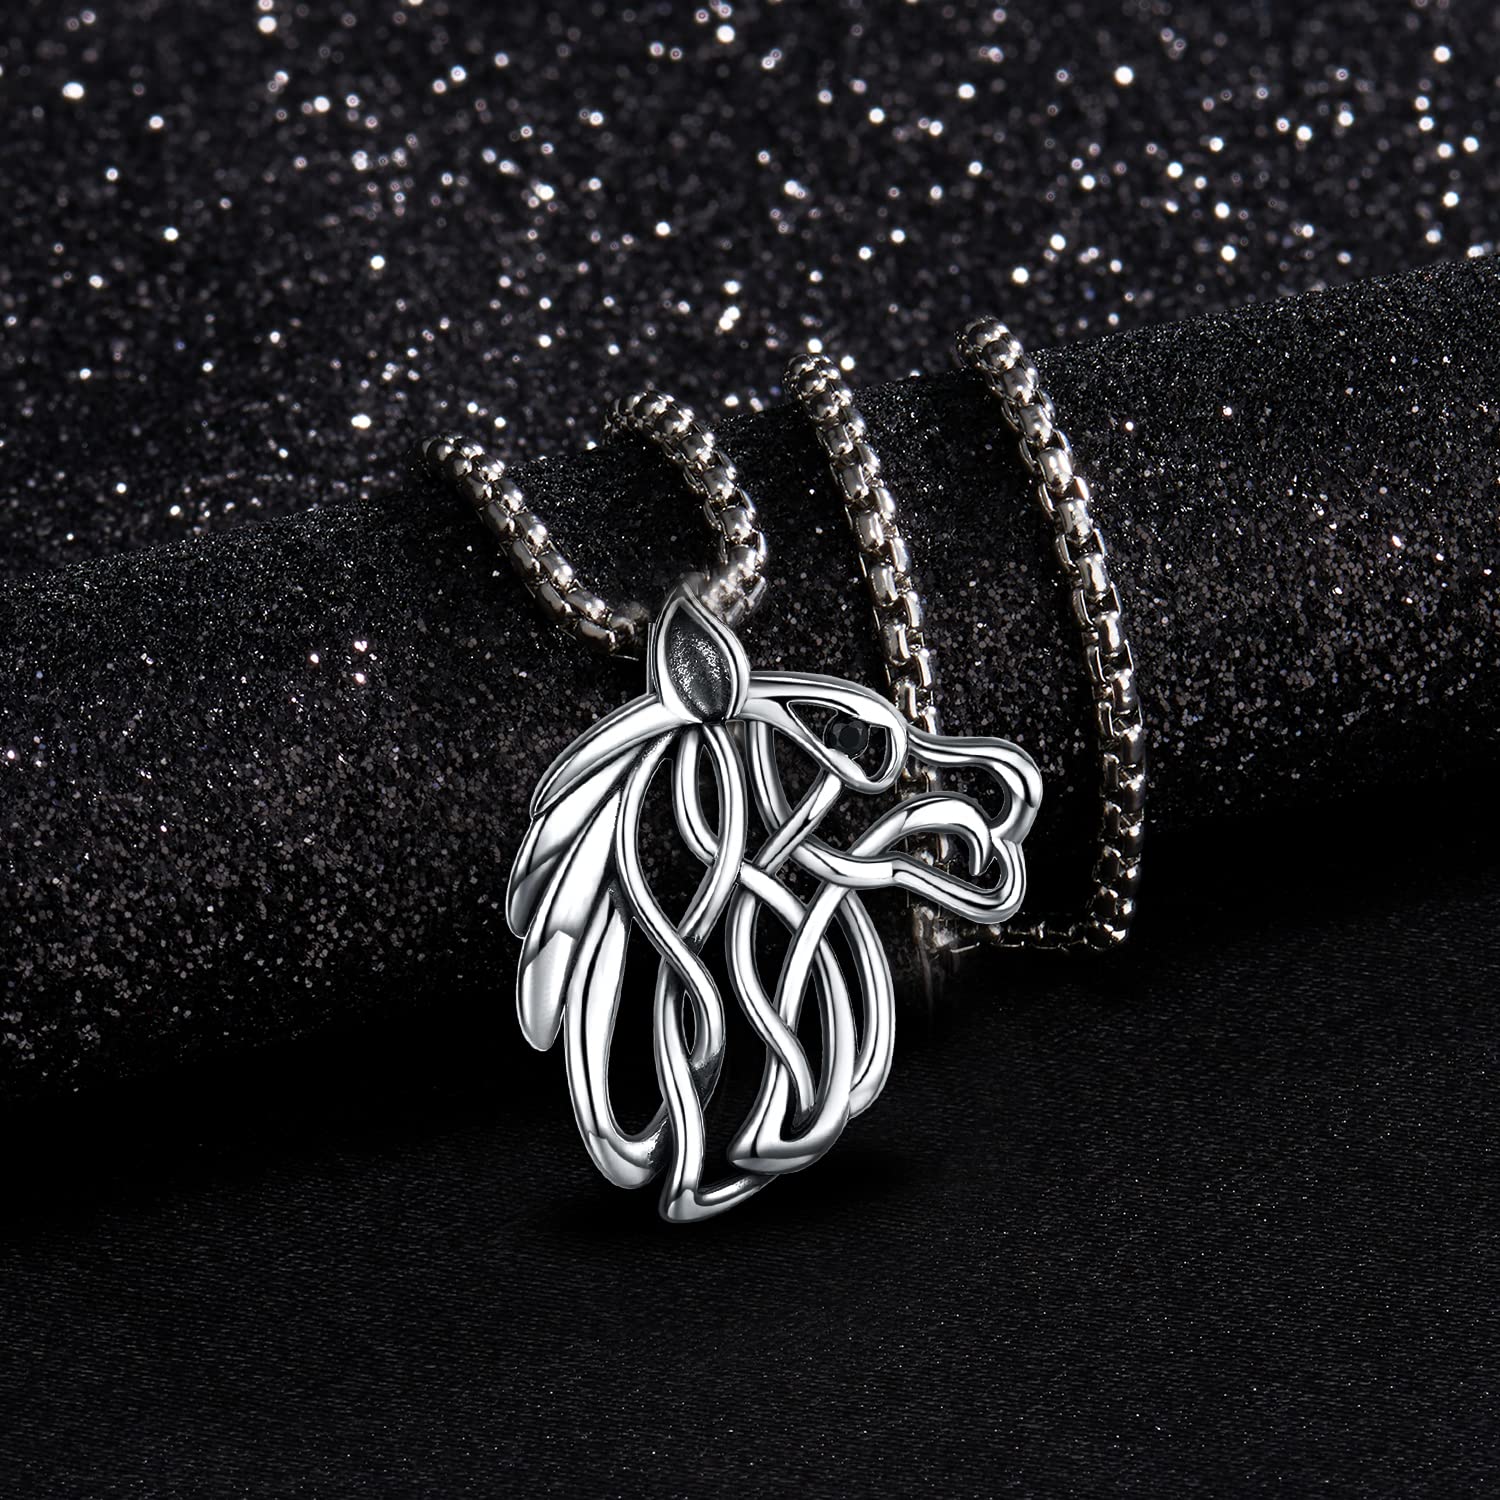 Snake/Wolf Necklace For Men Women 925 Sterling Silver Pentagram Pentacle Pendant Necklace Celtic Knot Wiccan Satanic Pendant Vintage Punk Gothic Jewelry Gifts with 20